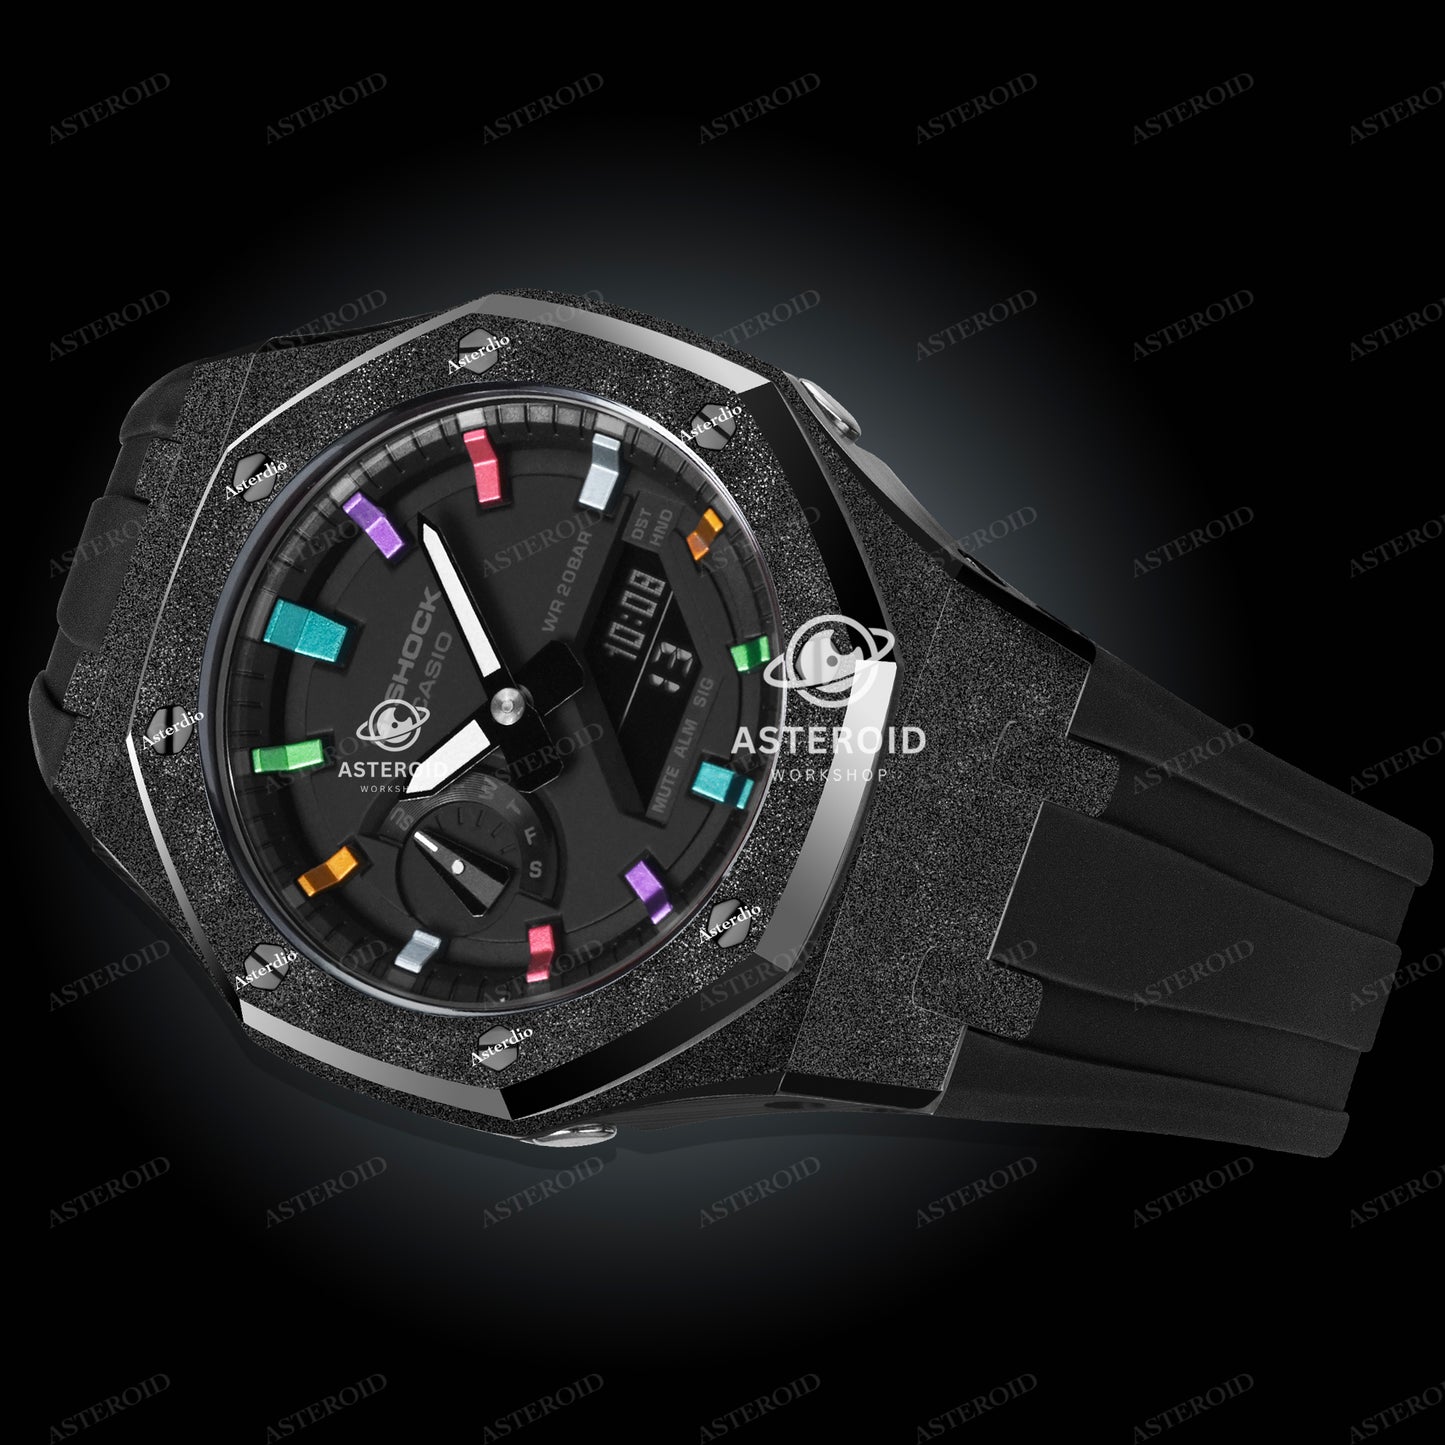 Black Frosted Case Rubber Strap Rainbow Time Mark Black Dial